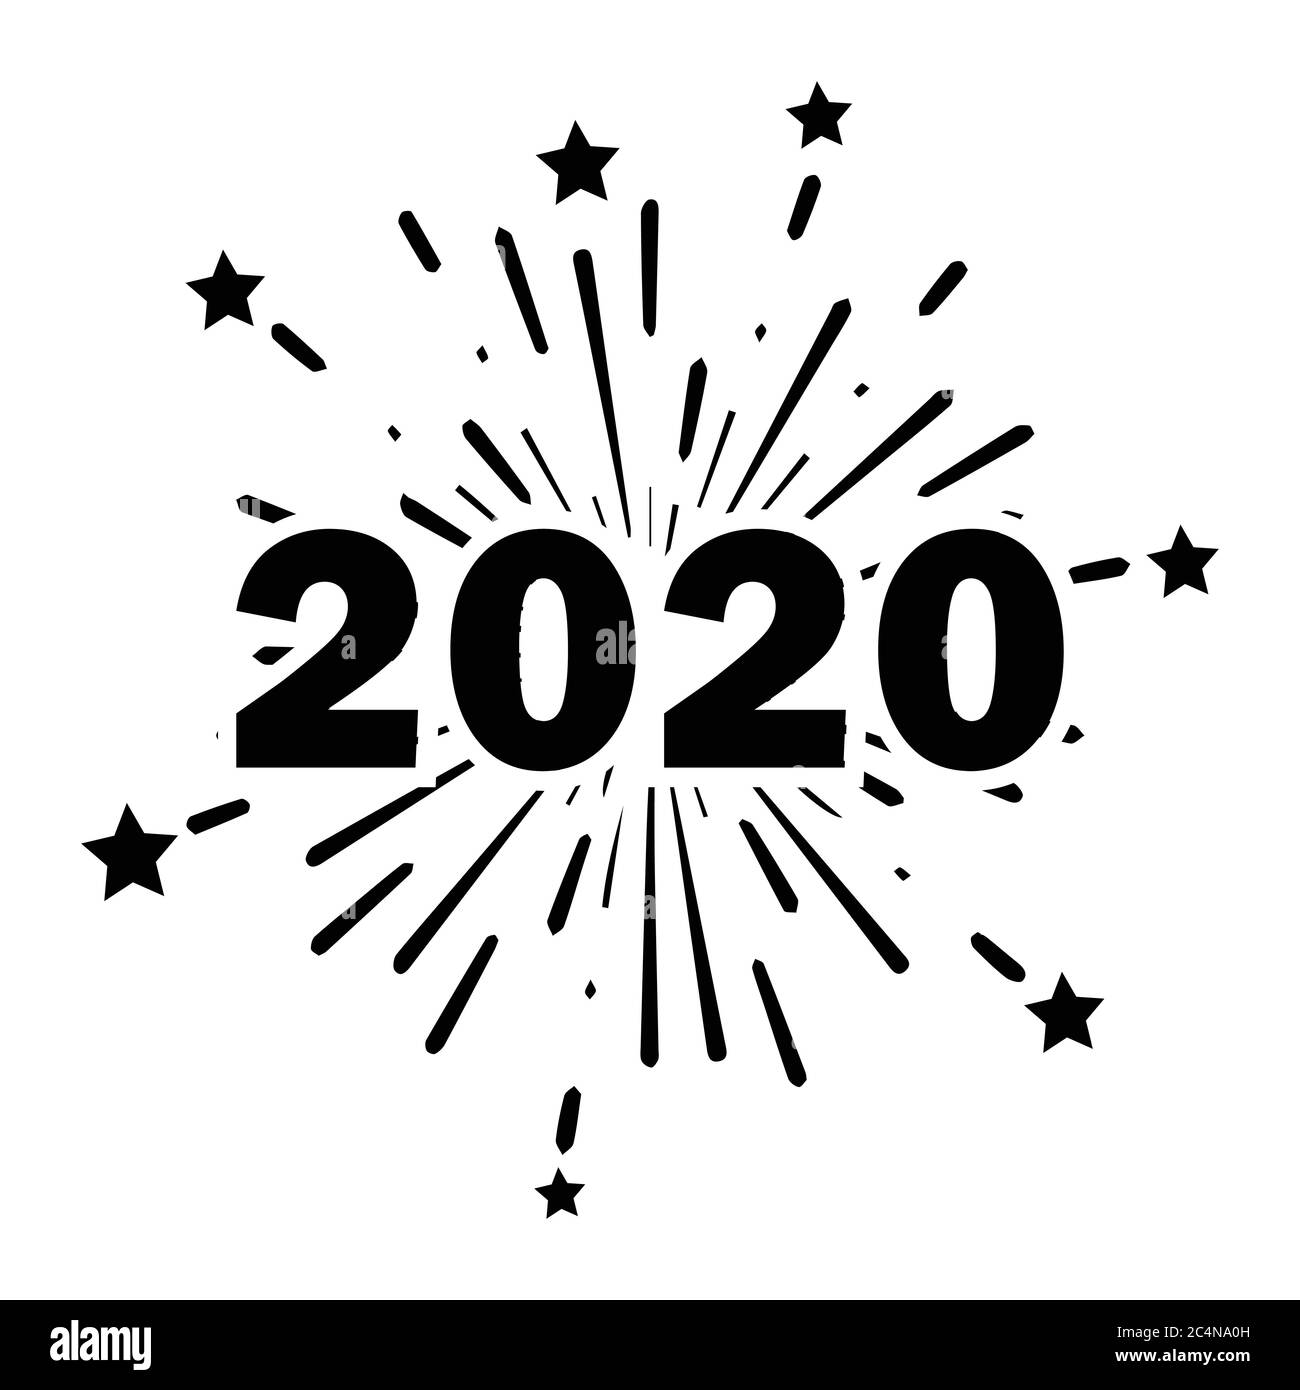 2020 Fireworks Stars New Year Celebration event. Black Poster Illustration Isolated on a White Background. EPS Vector Stock Vector